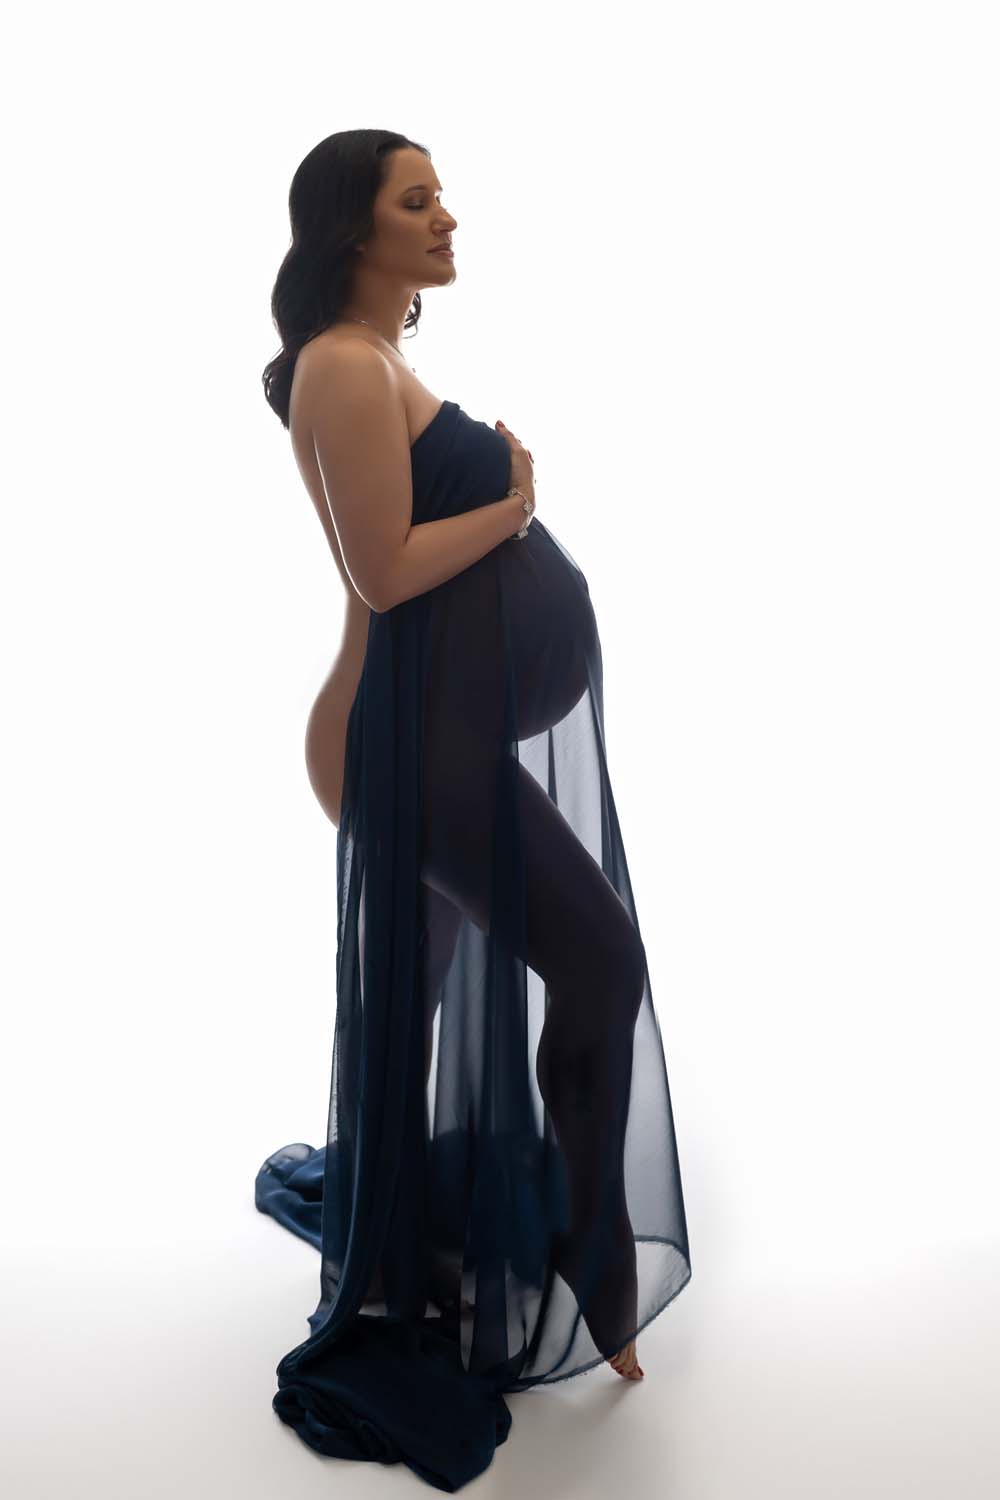 pregnant mom posed with draped fabric